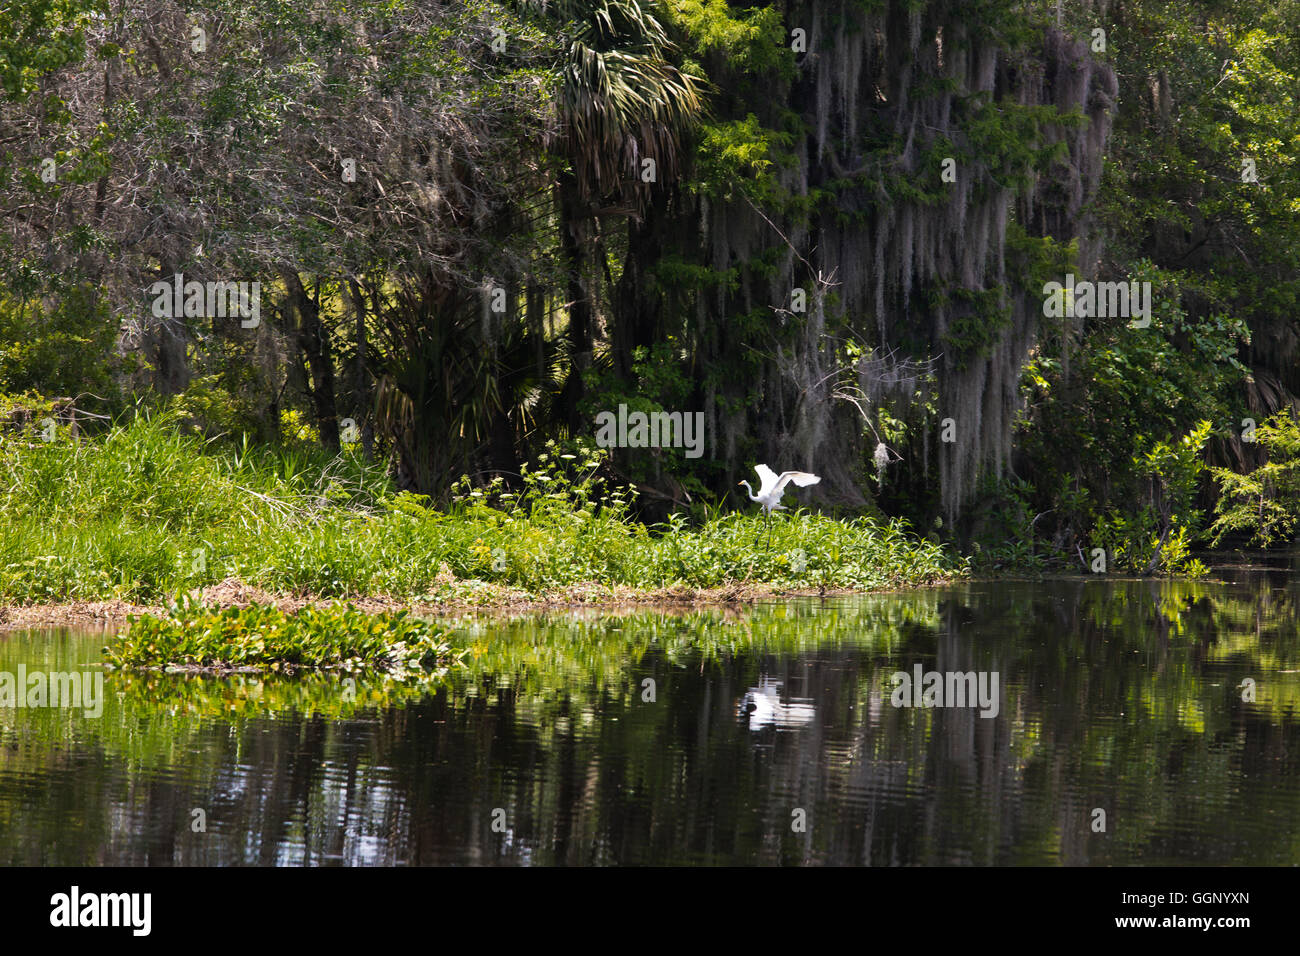 A Great Egrit lands in a swamp land ecosystem - NORTHERN FLORIDA Stock Photo